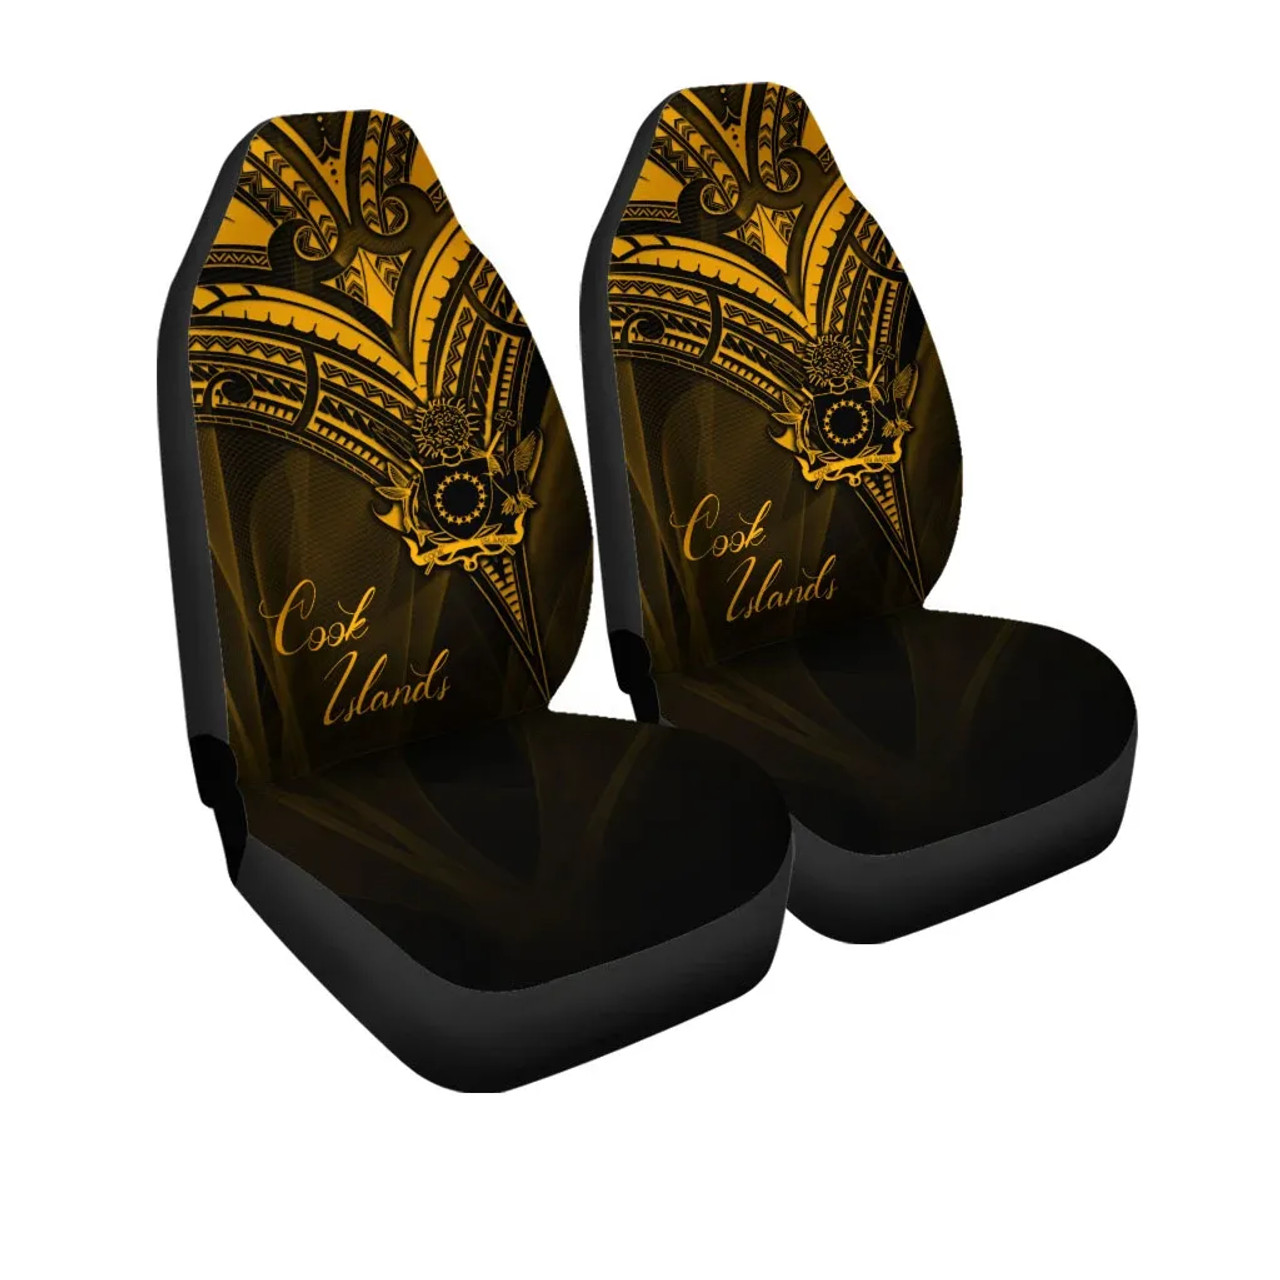 Cook Islands Car Seat Cover - Gold Color Cross Style